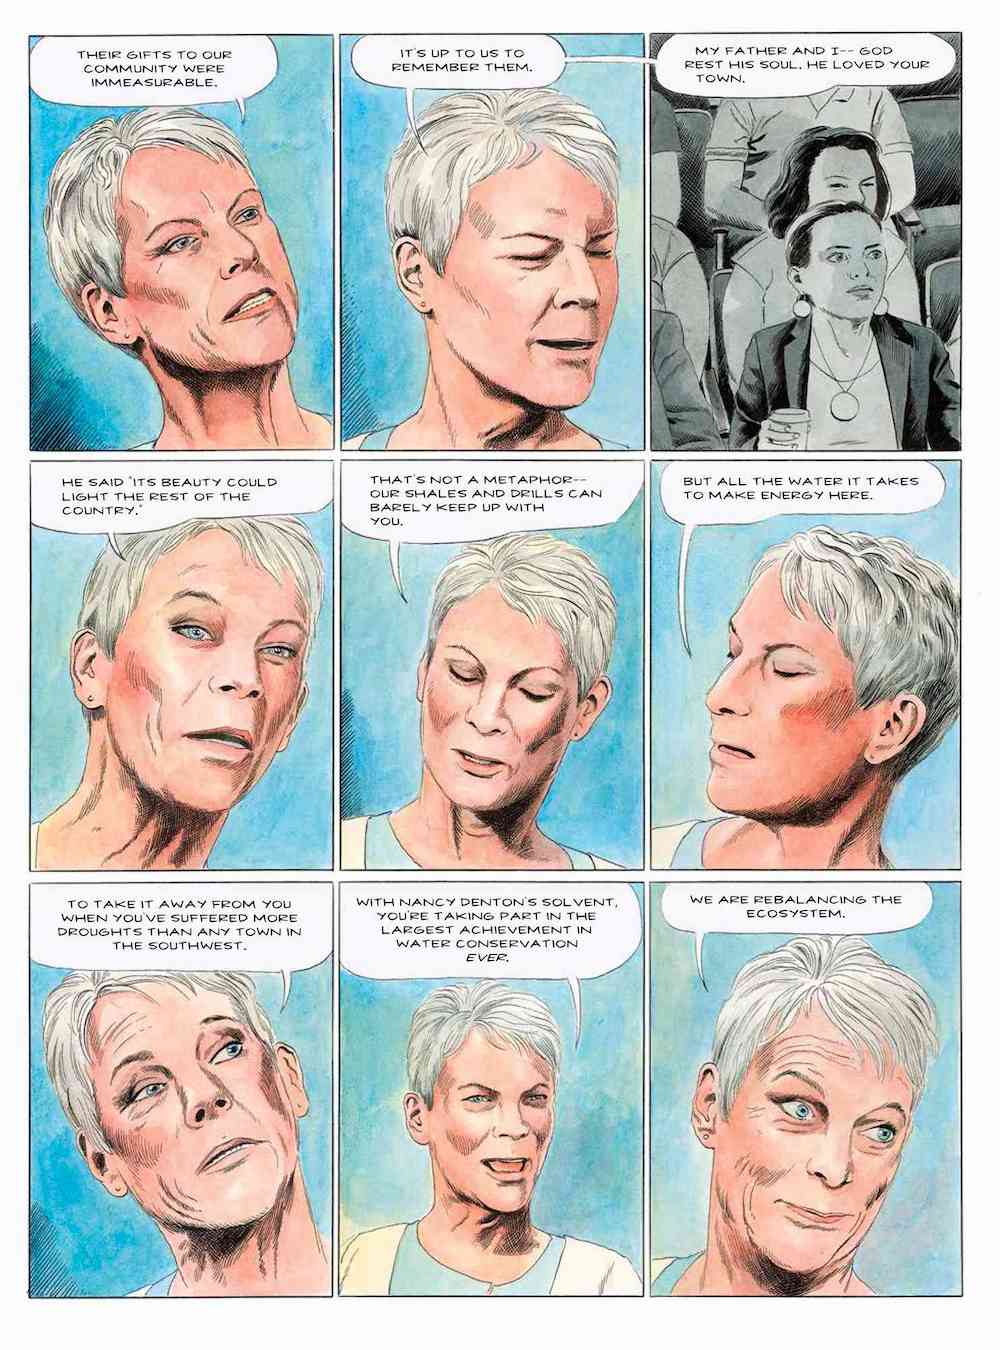 Jamie Lee Curtis look-alike in Mother Nature, co-written by Jamie Lee Curtis and Russell Goldman with art by Karl Stevens